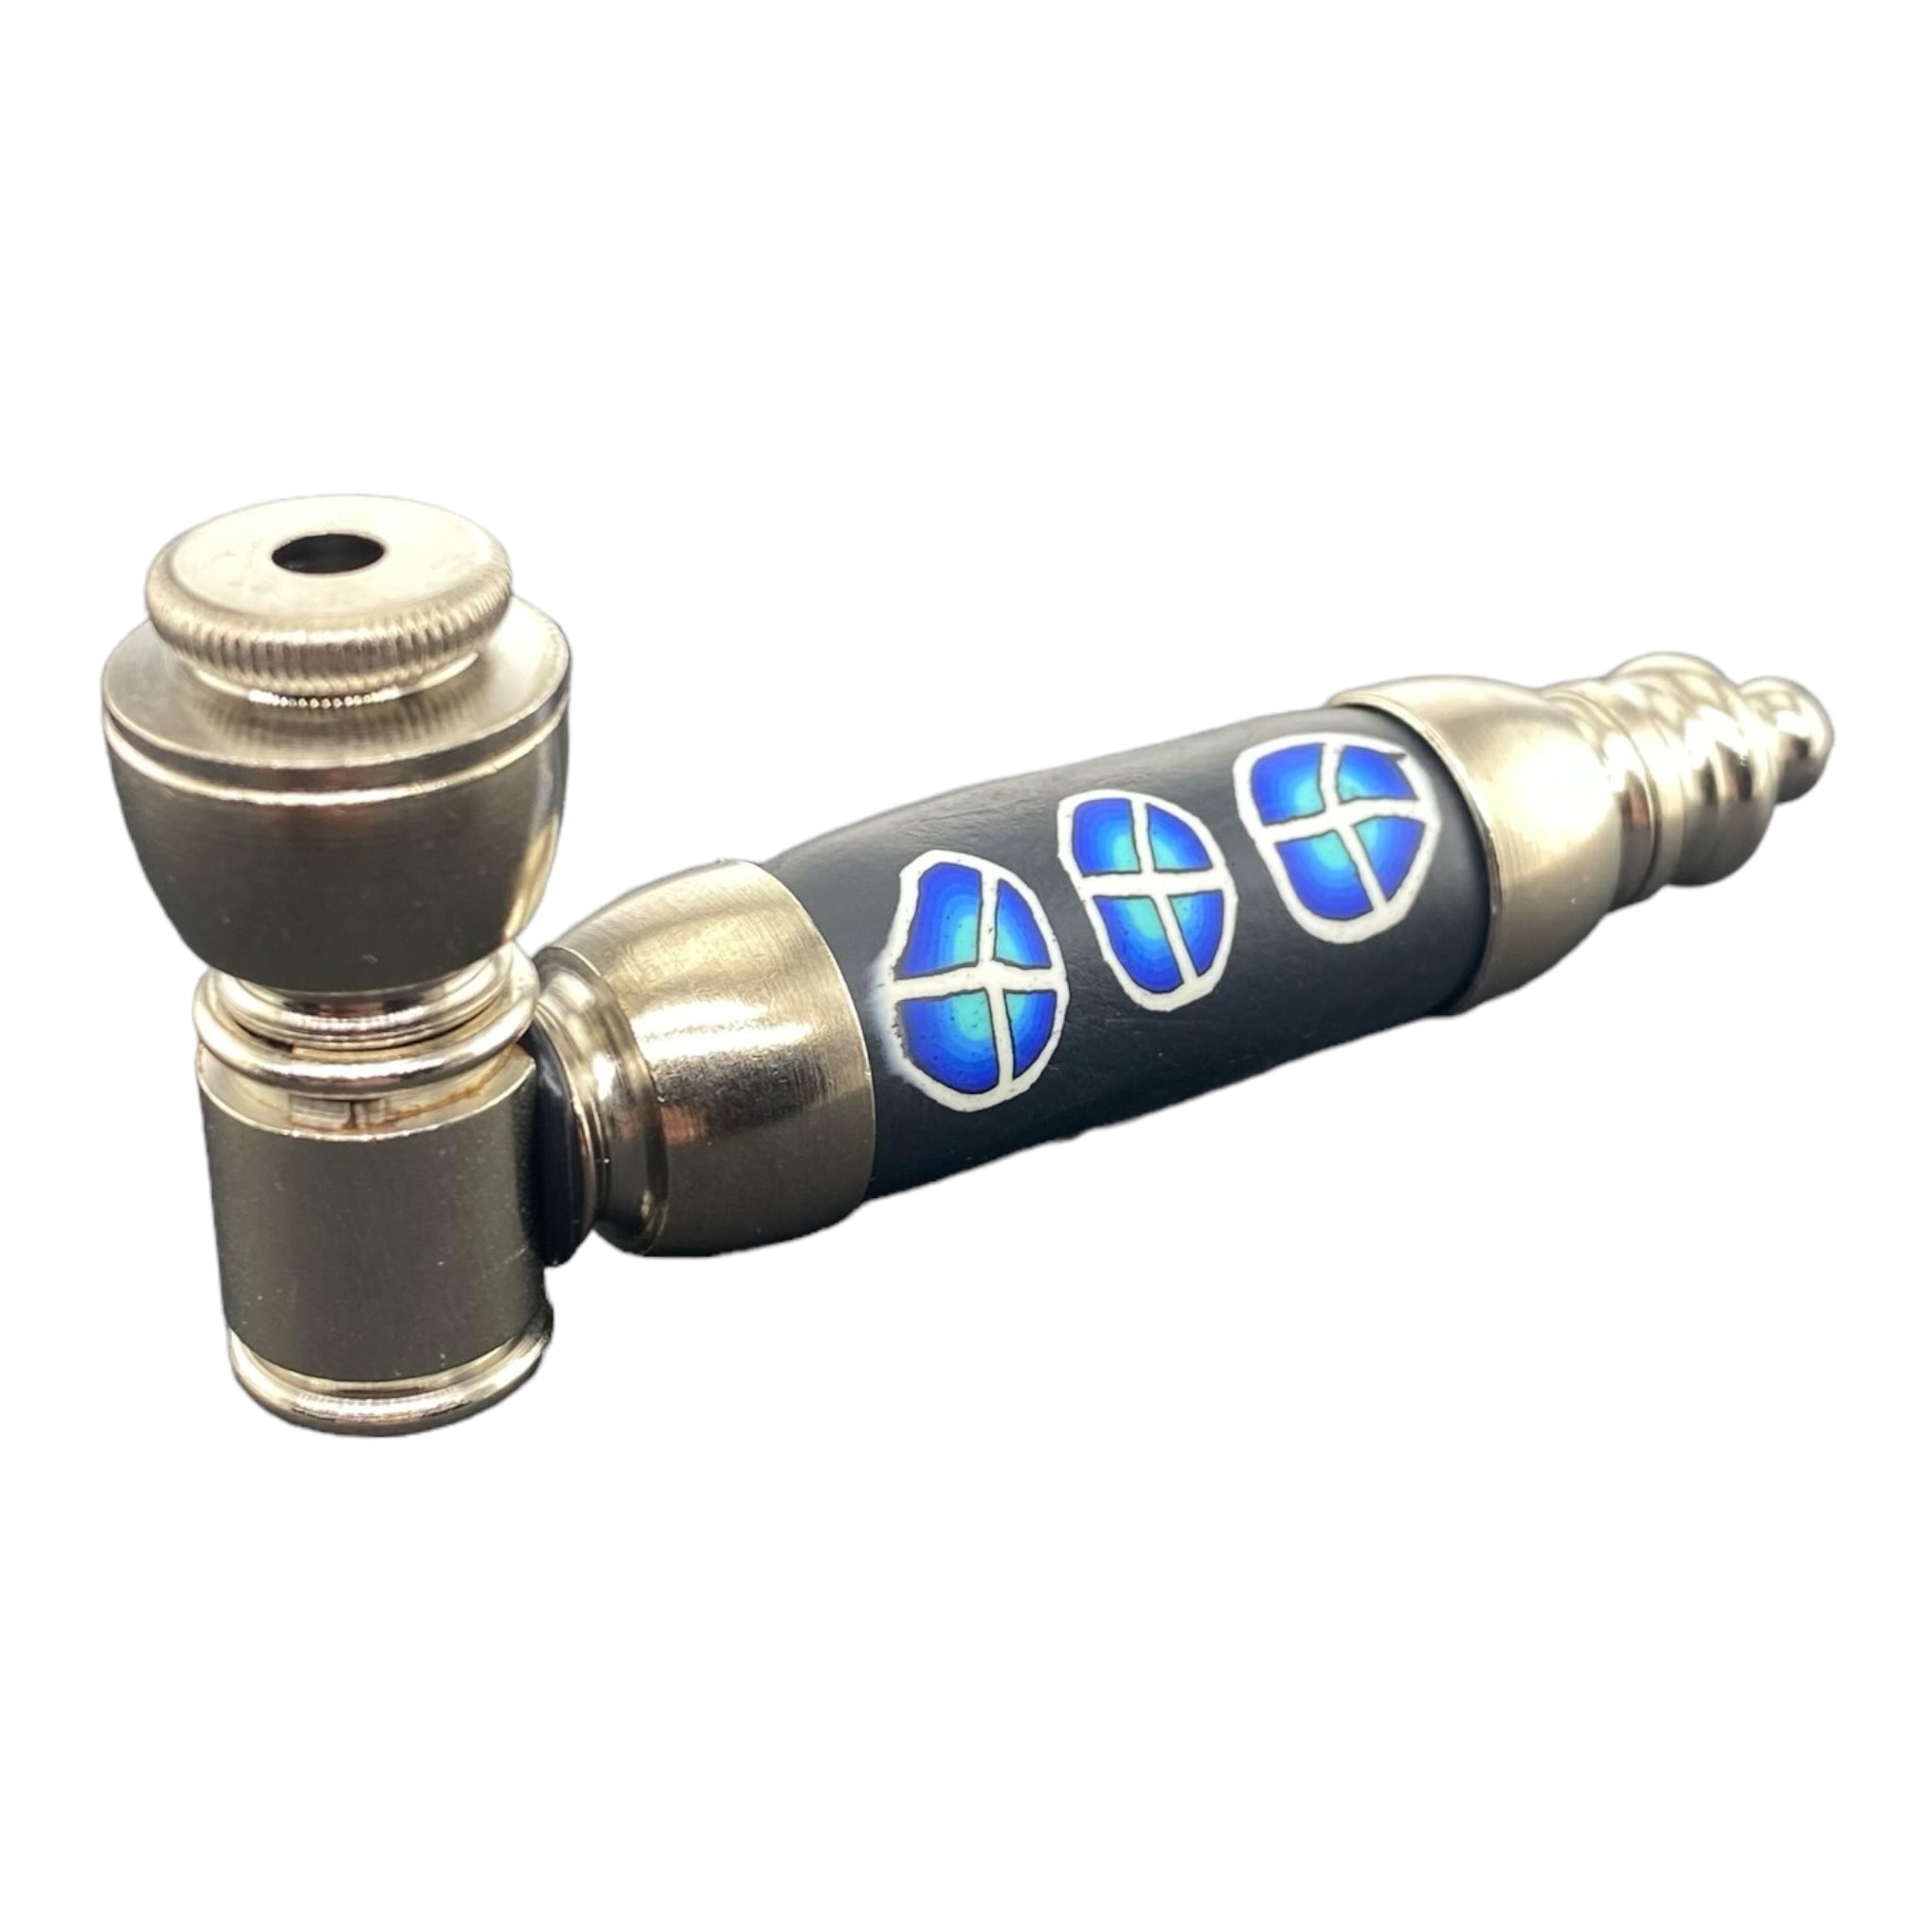 Metal Hand Pipes - Large Chamber Silver Chrome Hand Pipe With Blue Peace Signs